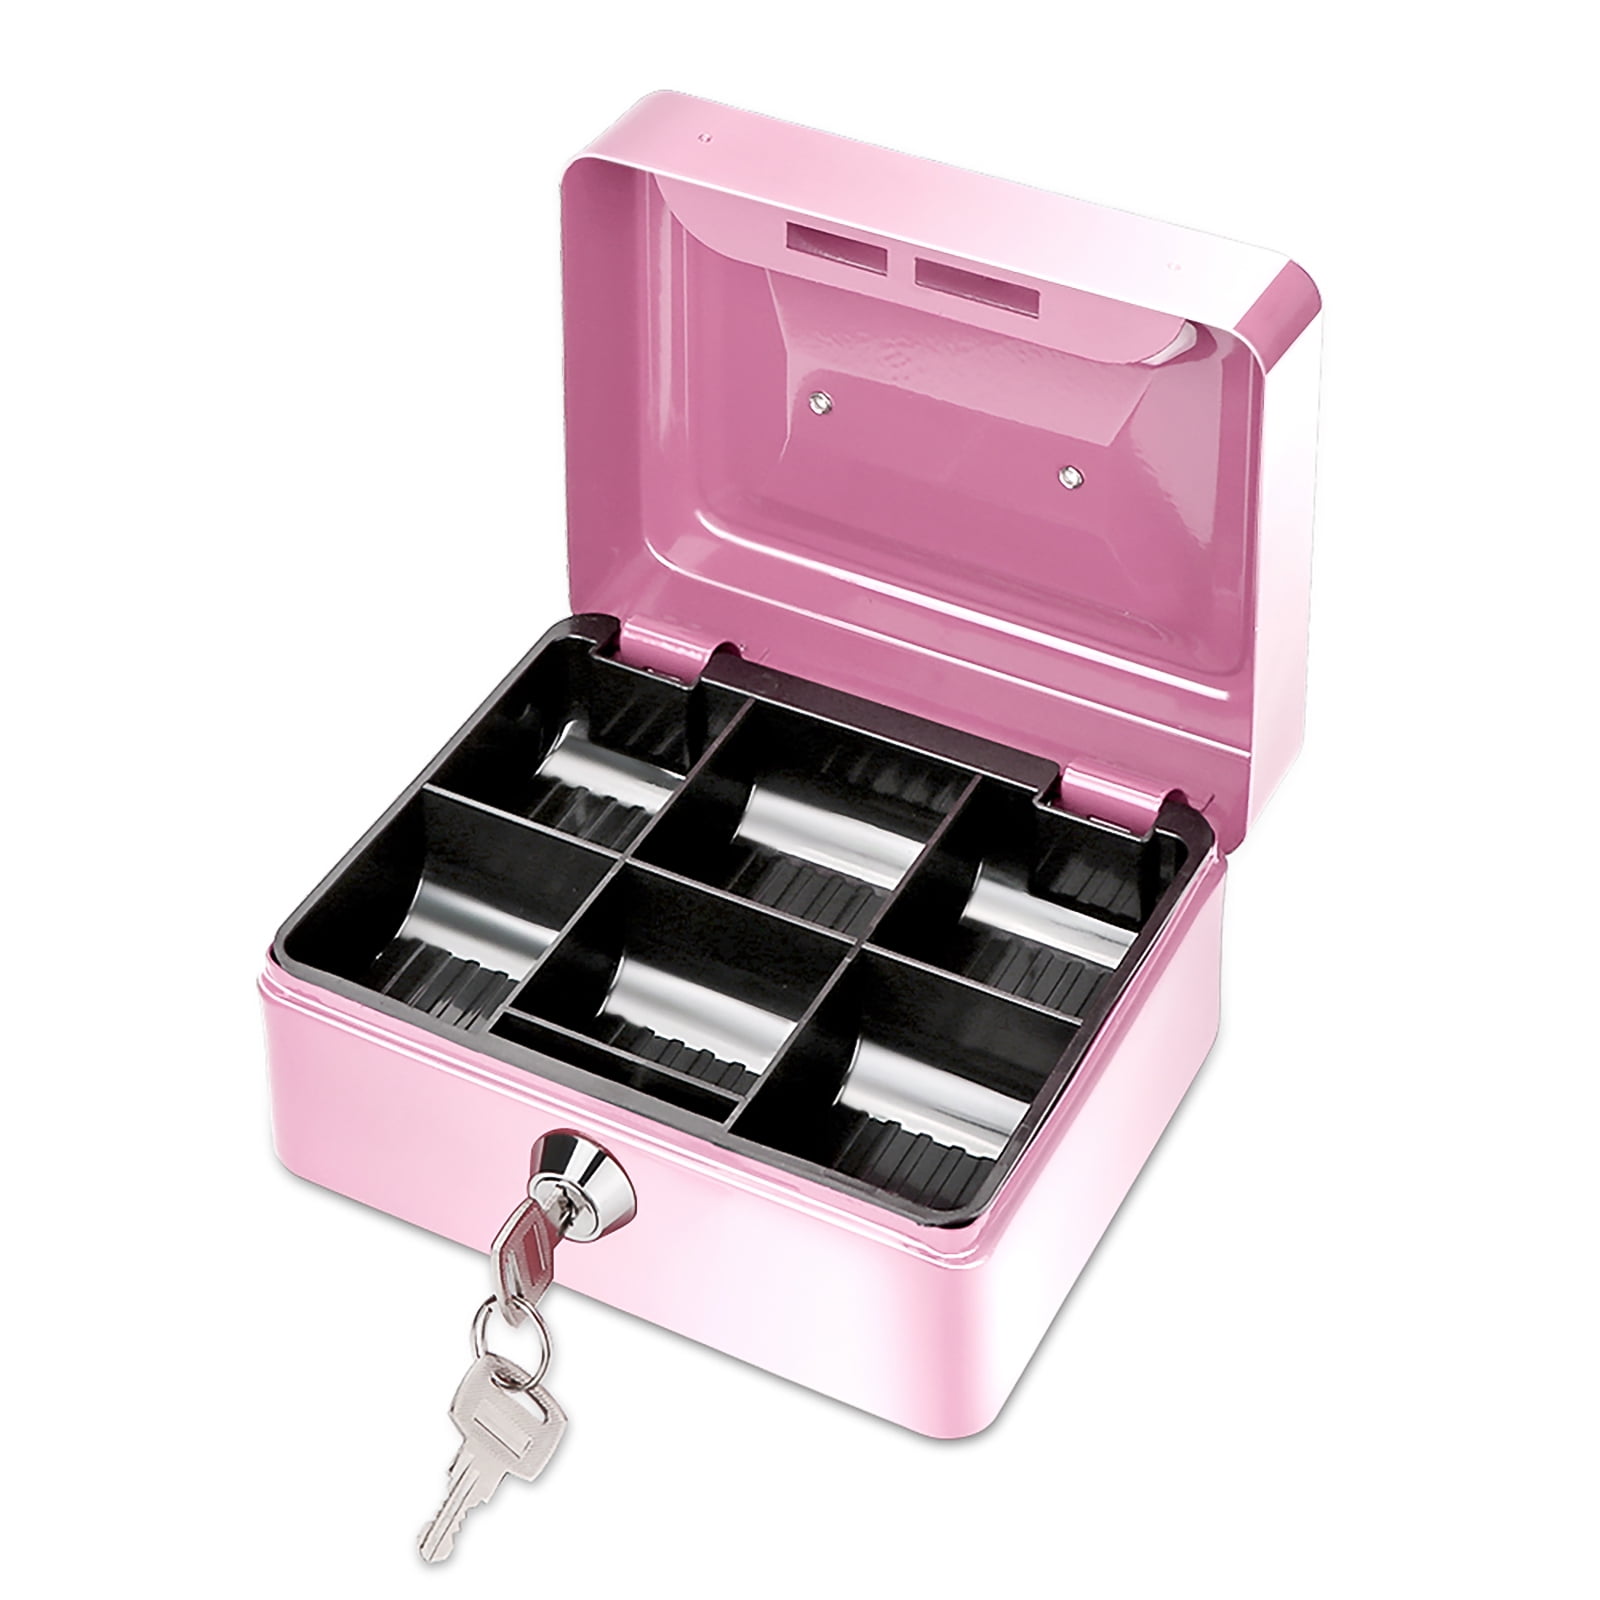 Small Cash Box Locking Money Tray with Combination Lock Durable Metal Safe 